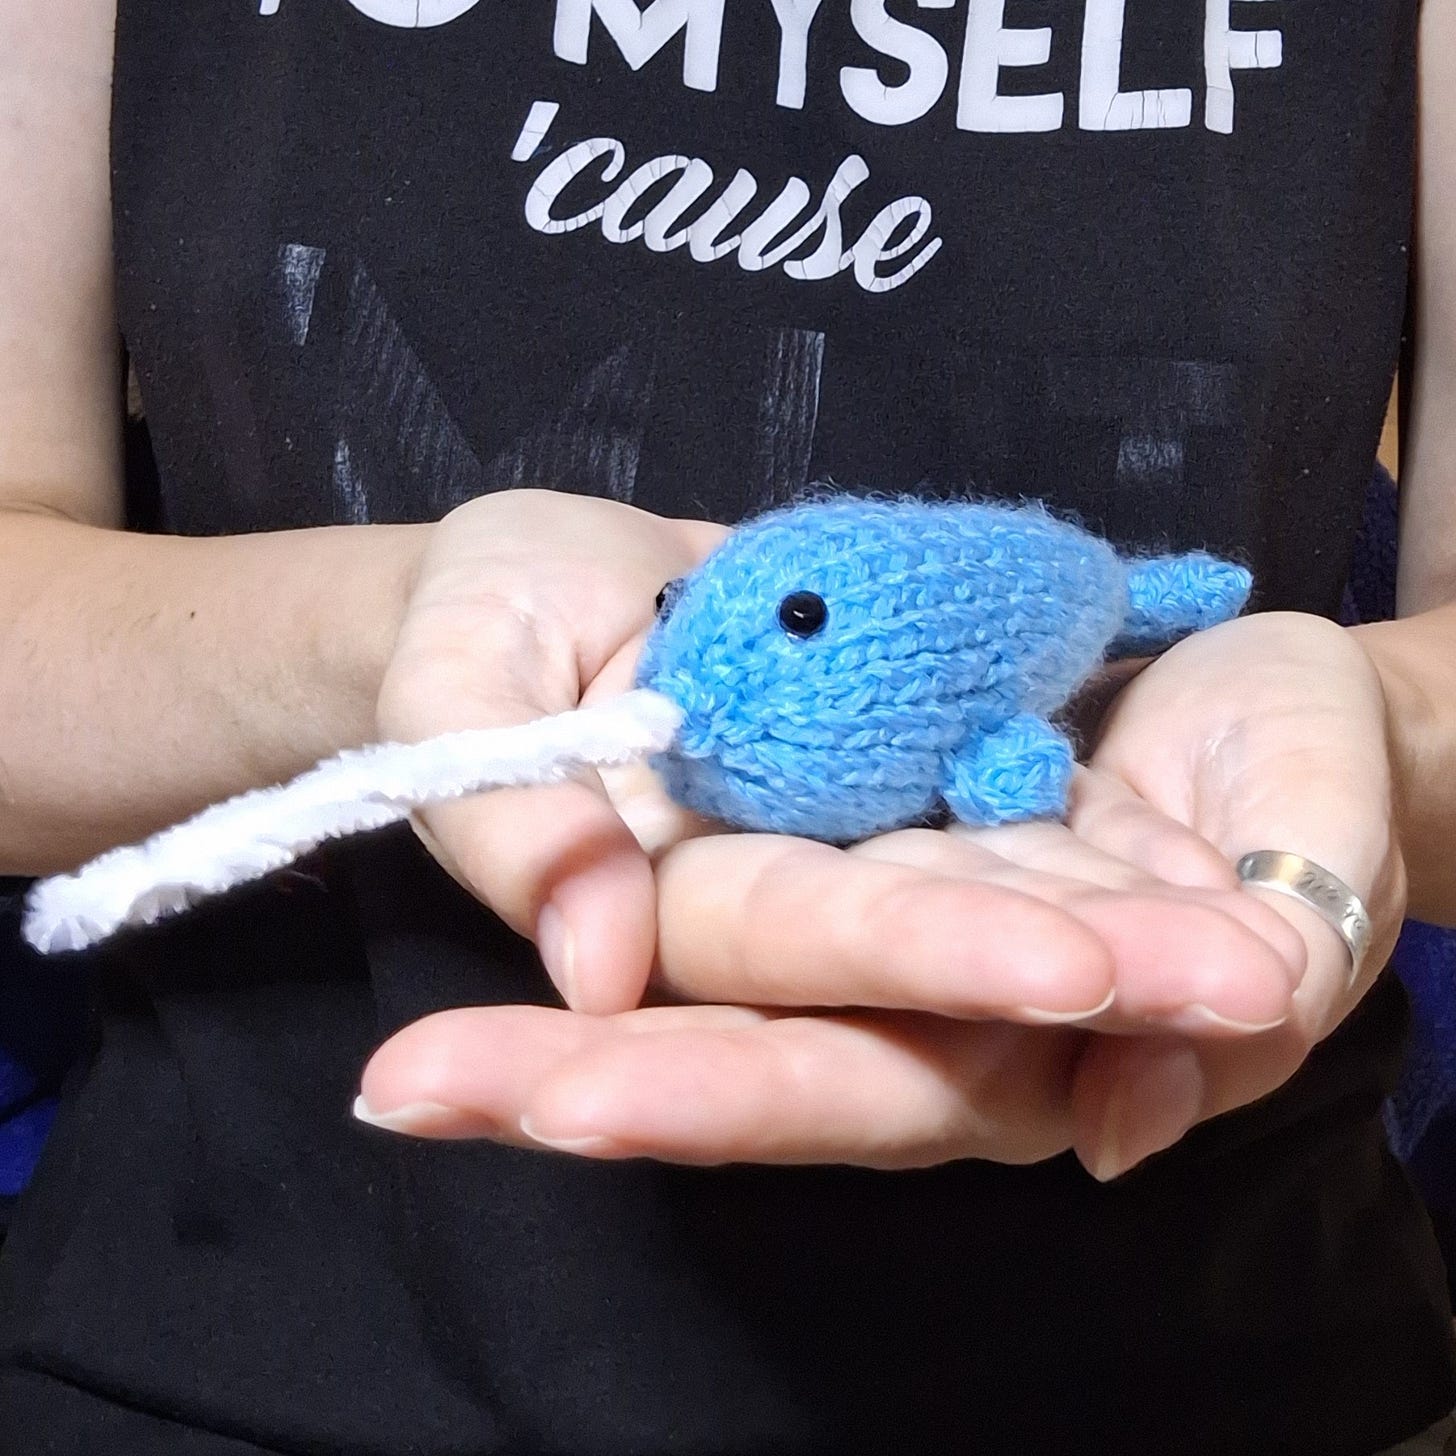 image of a small, knitted narwhal made by fantasy author Patricia J.L.